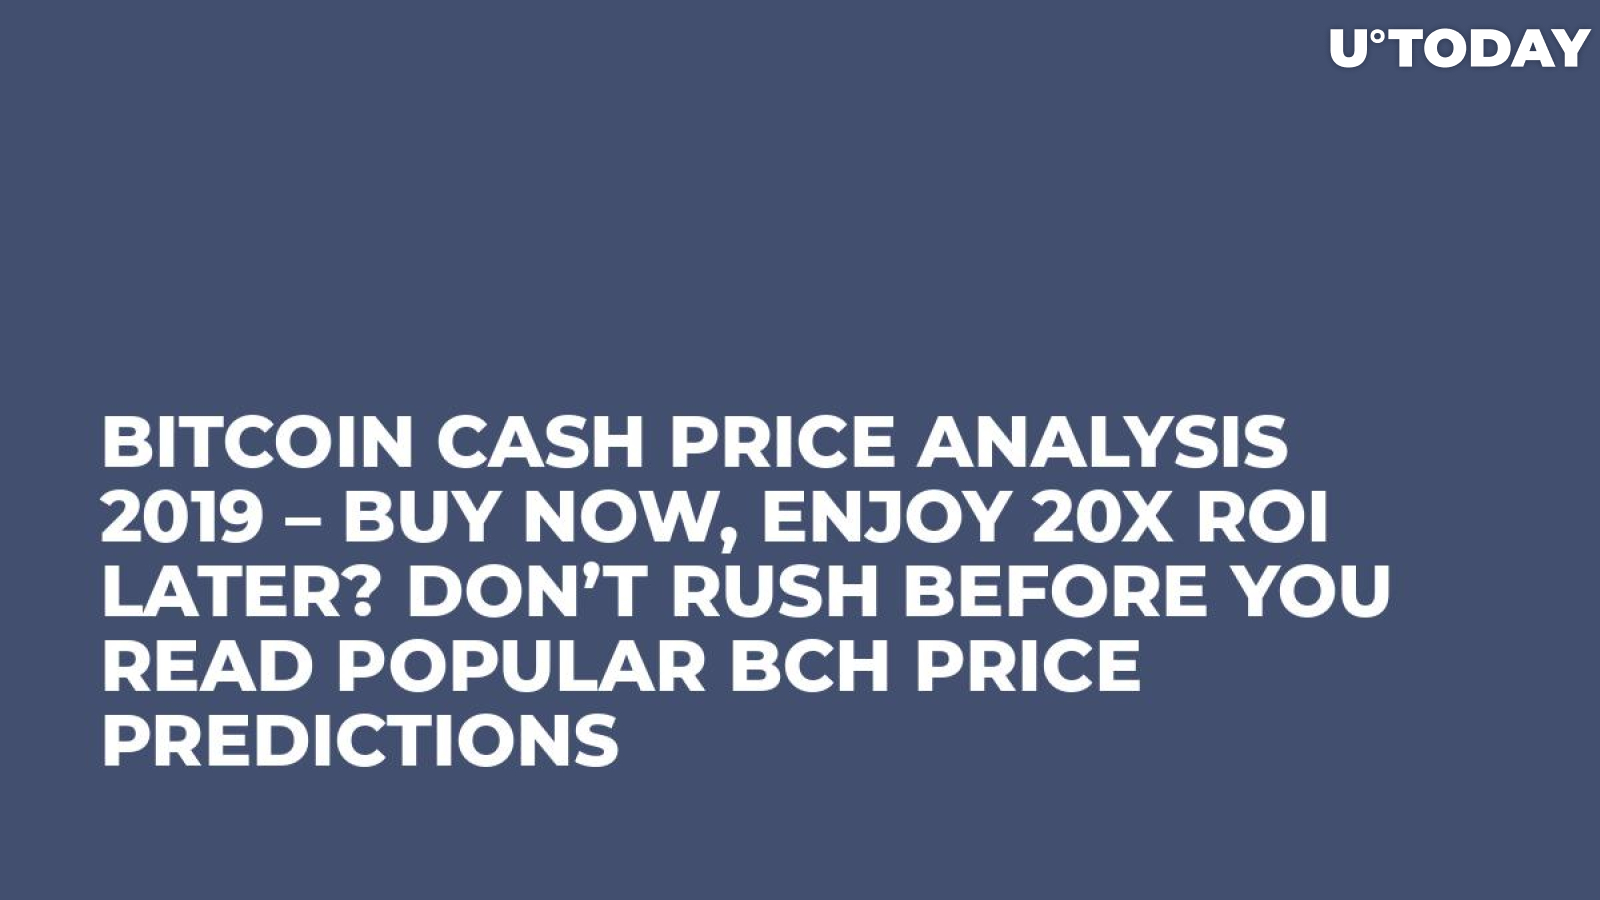 Bitcoin Cash Price Analysis 2019 – Buy Now, Enjoy 20x ROI Later? Don’t Rush Before You Read Popular BCH Price Predictions